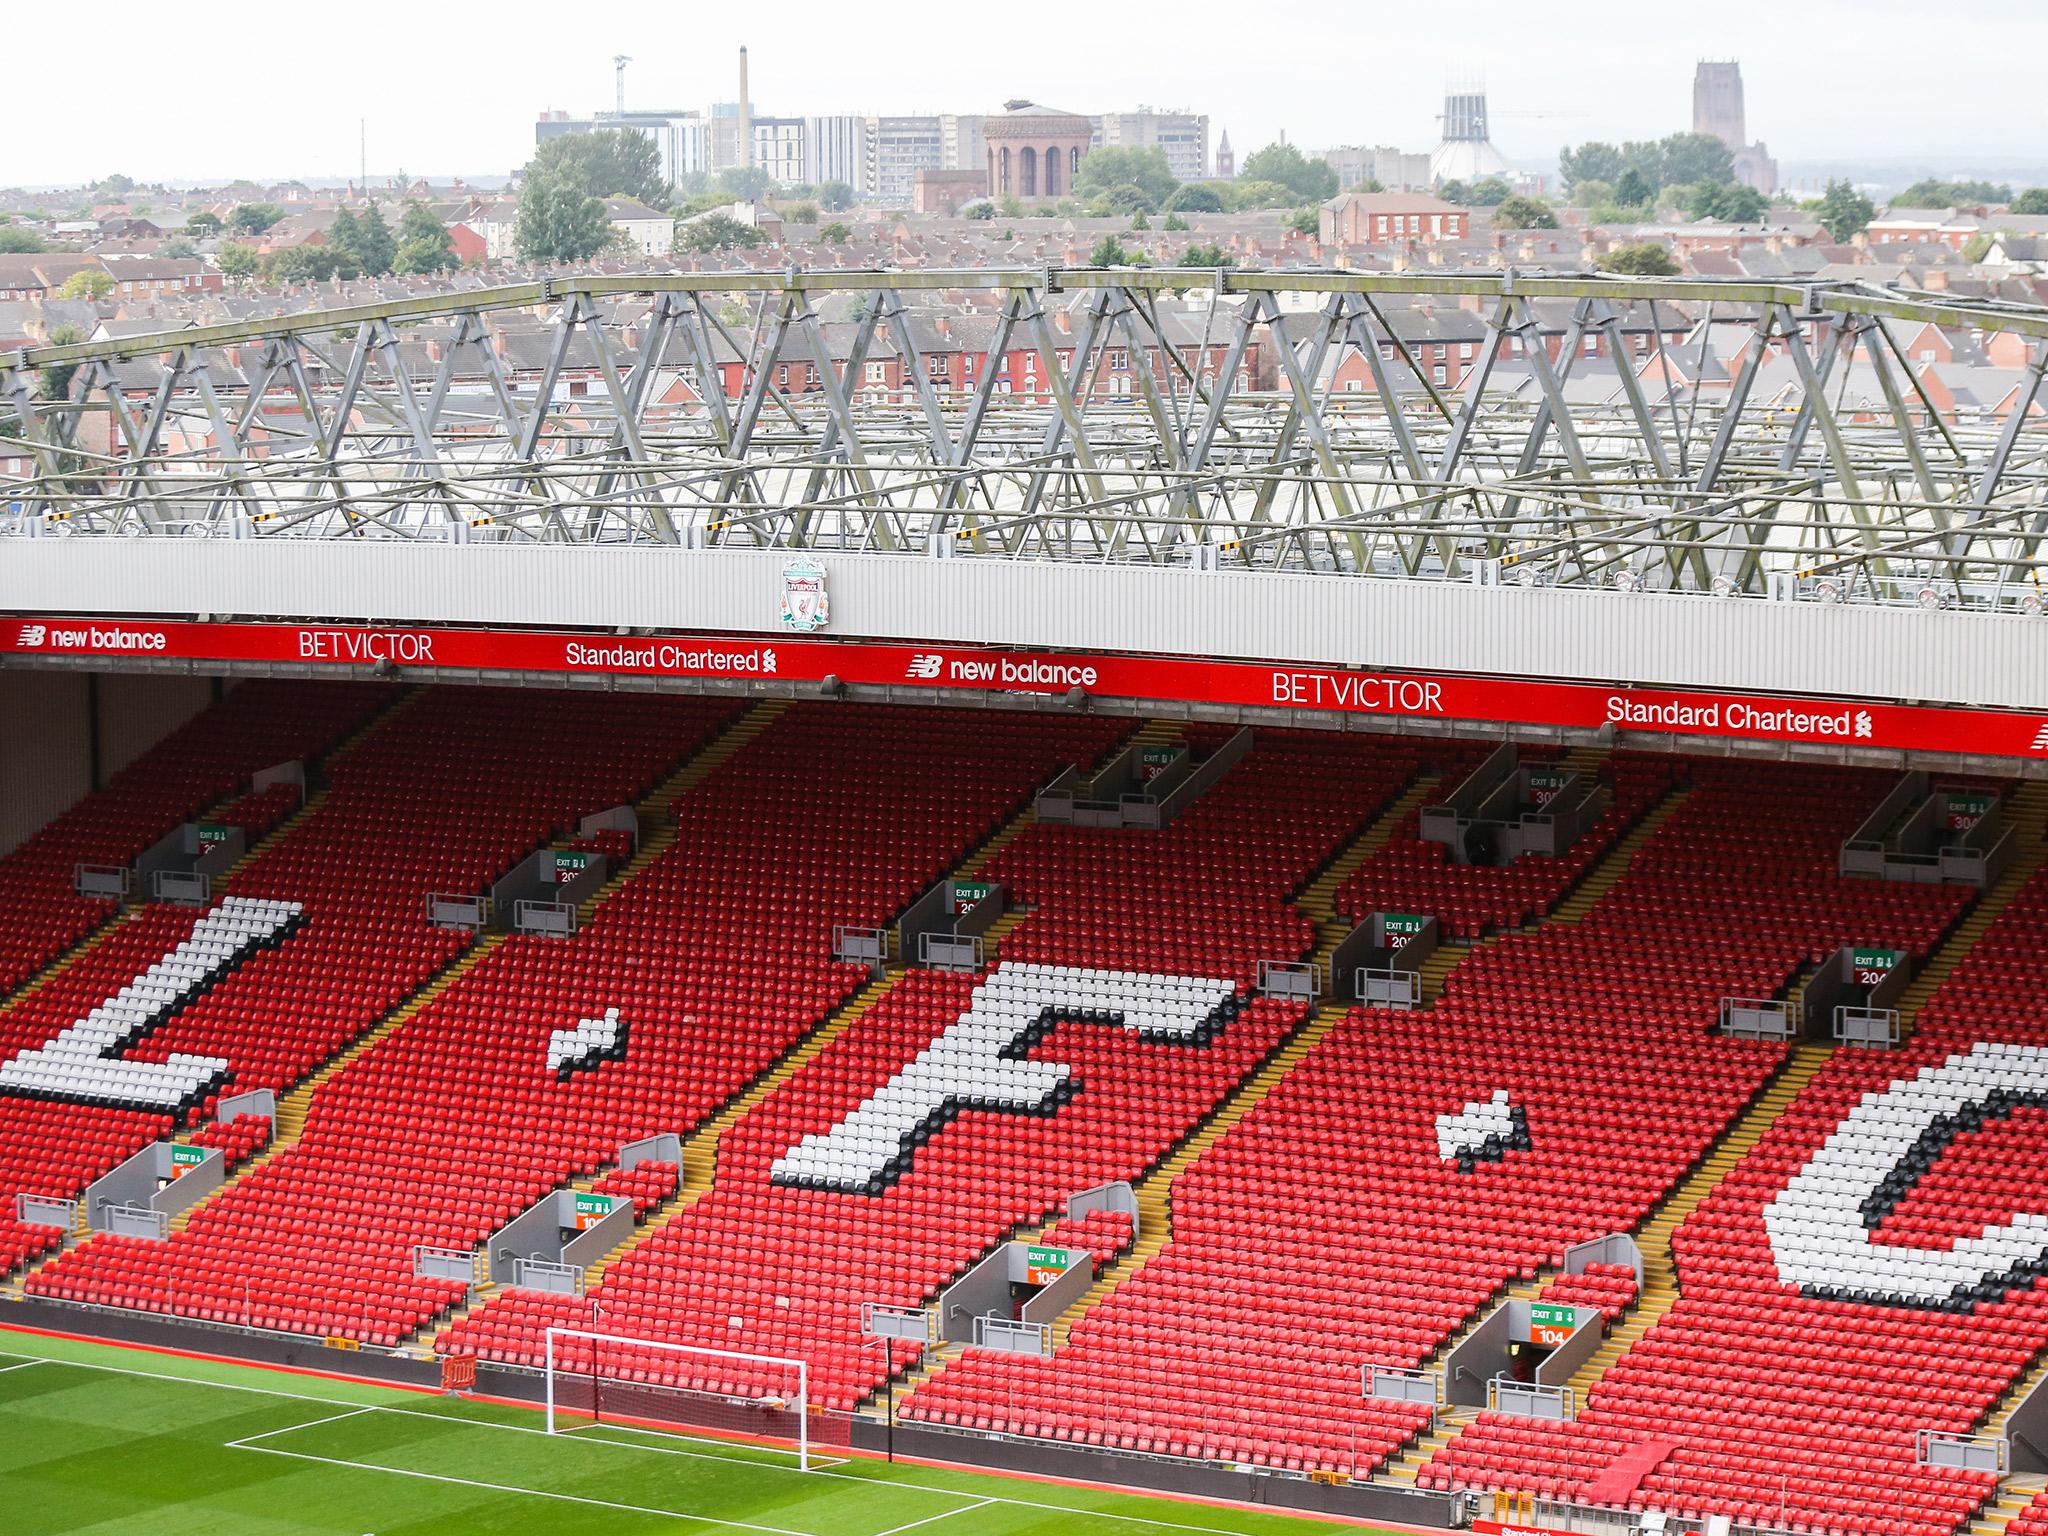 Anfield new Main Stand was opened on Friday morning (Getty)